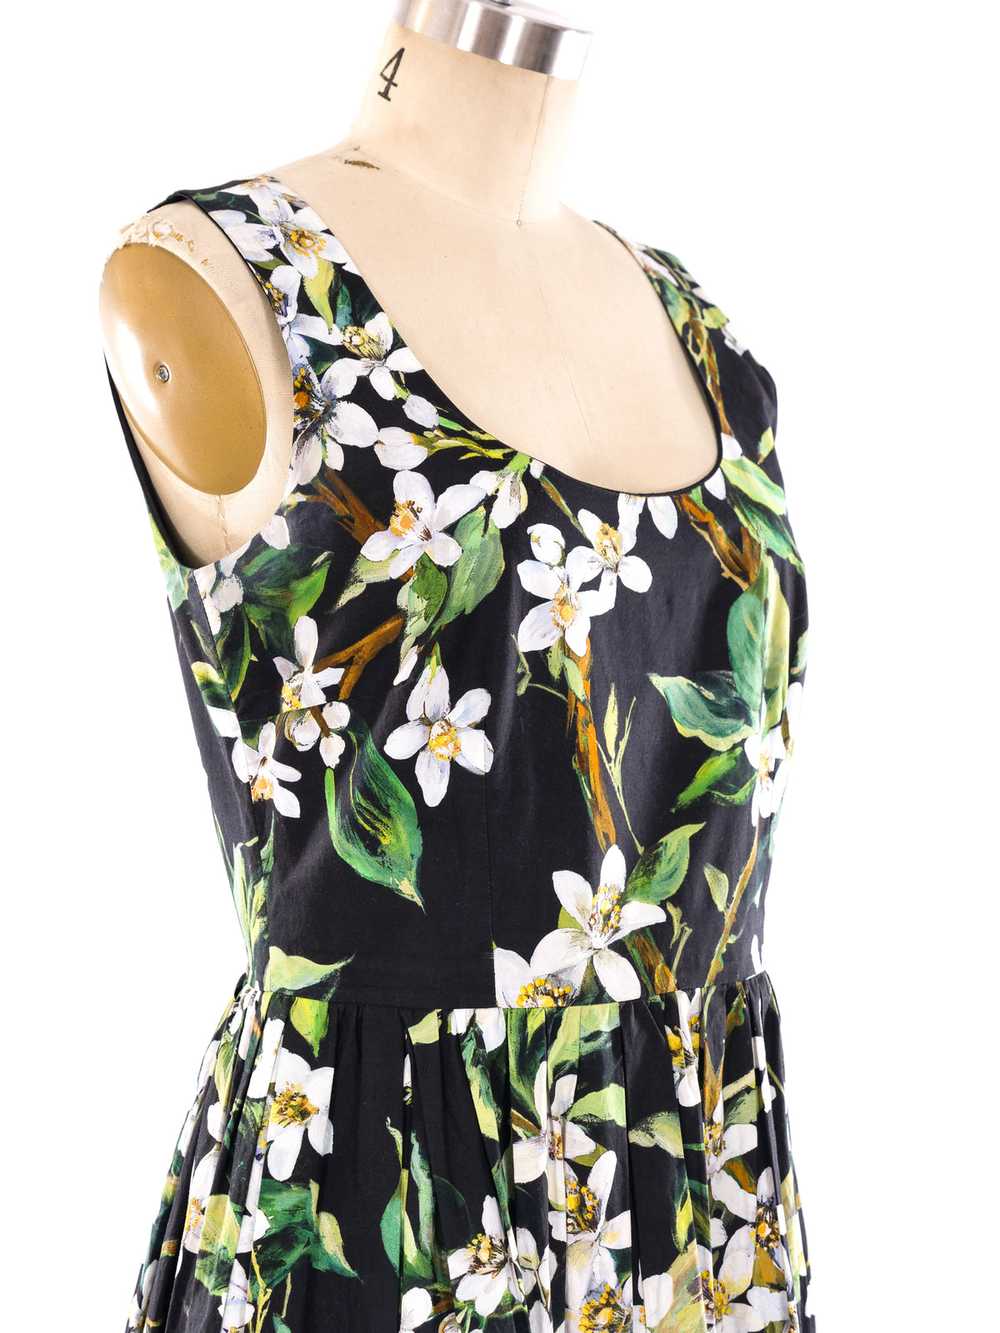 Dolce and Gabbana Floral Printed Tank Dress - image 6